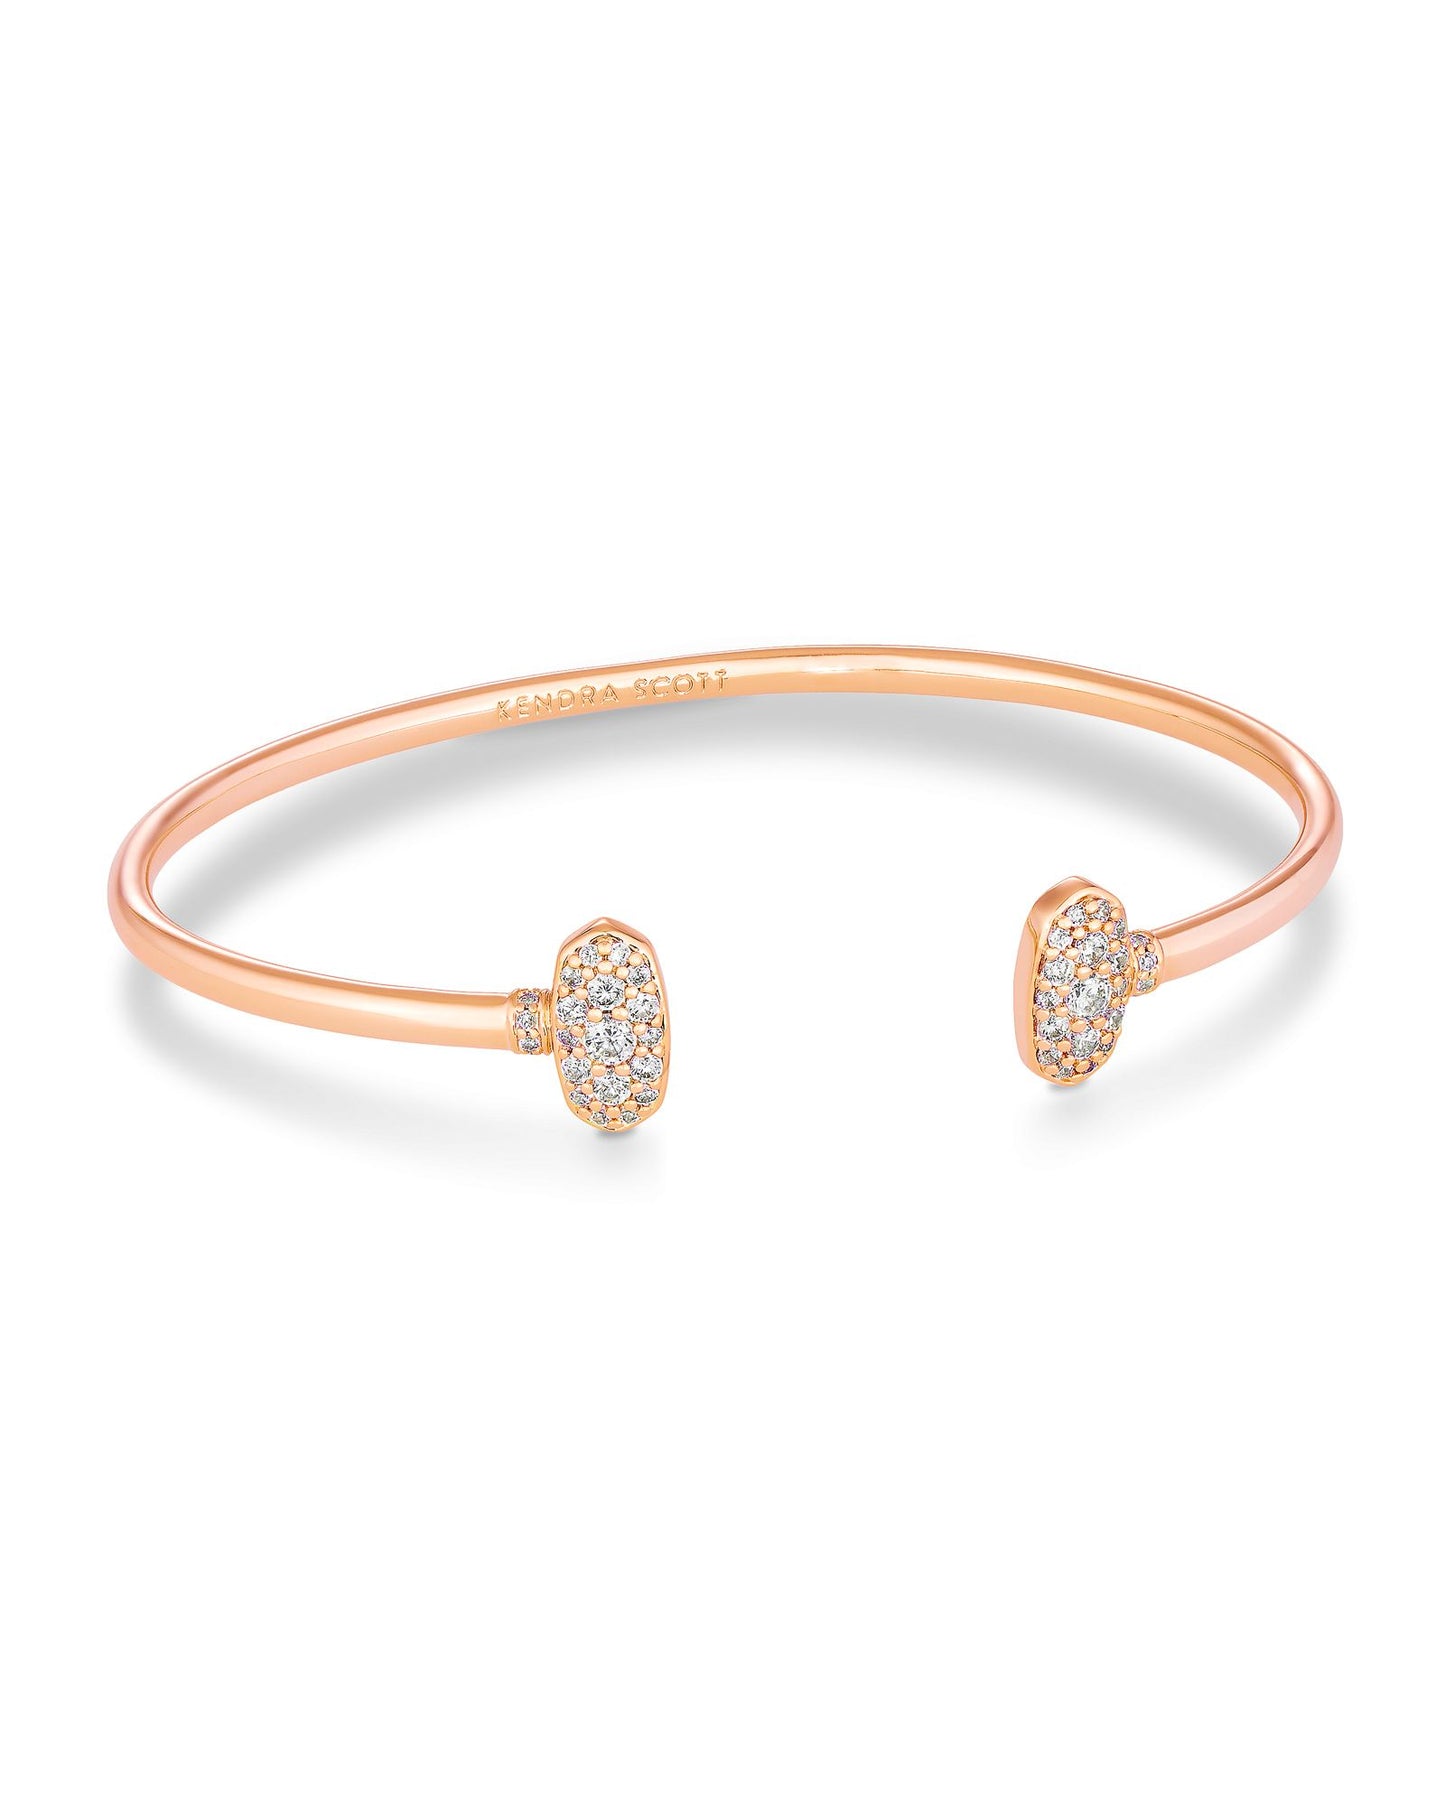 Grayson Rose Gold Cuff Bracelet in White Crystal | KENDRA SCOTT - The Street Boutique 